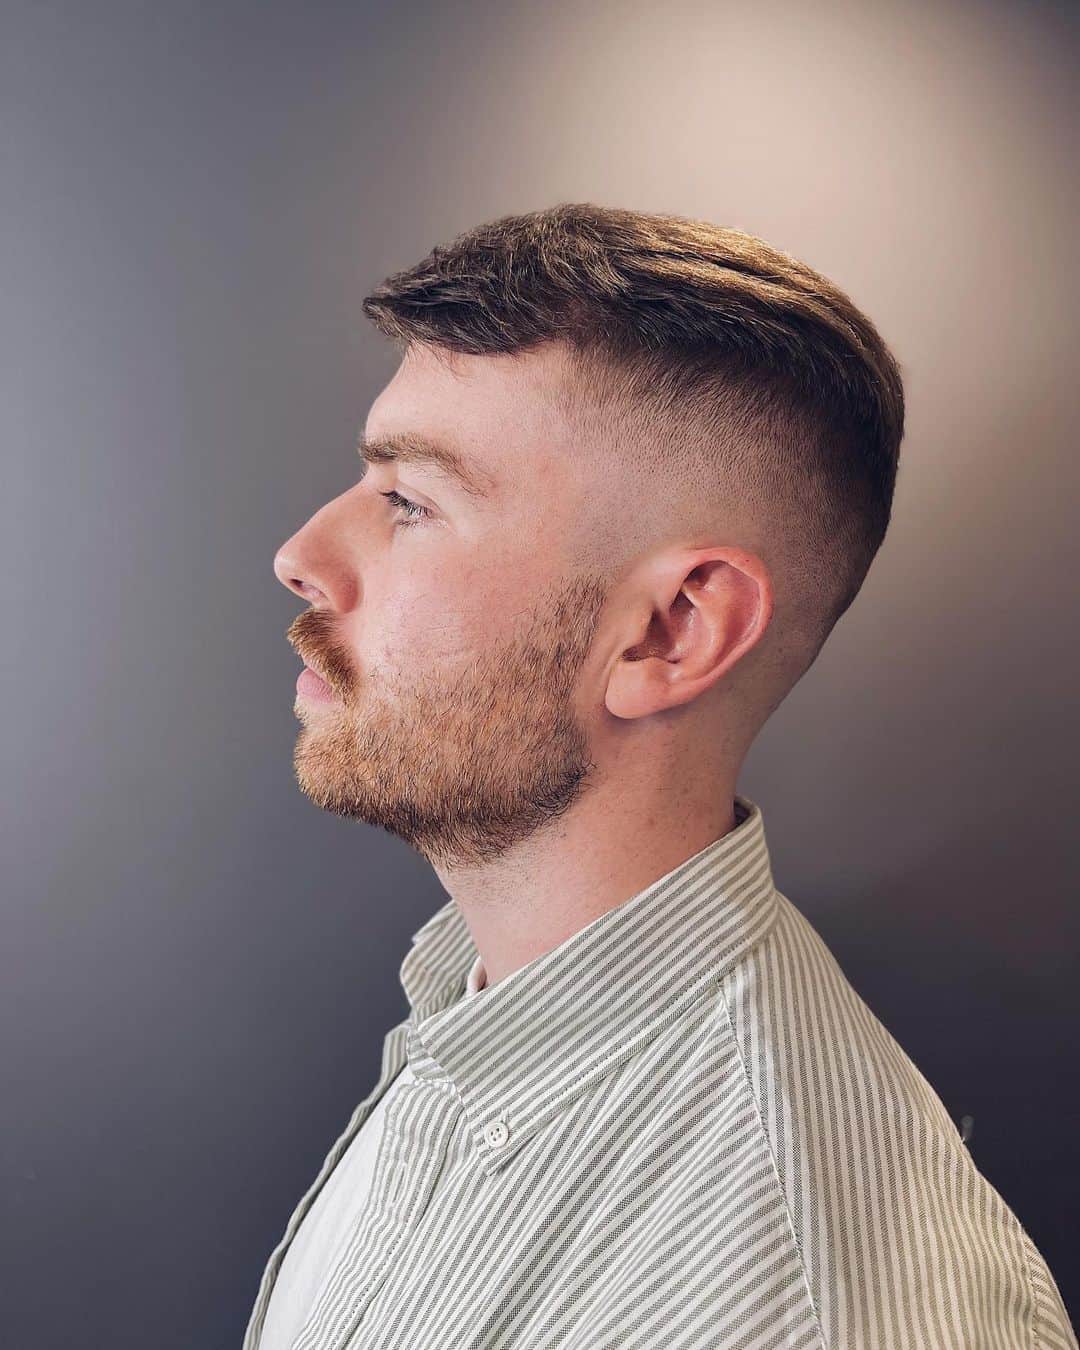 disneydescendantsのインスタグラム：「Skin fade for Mathias, I’ve got plenty of room to get you in for a cut this week so get your slot booked via DMs or the link in my bio! 🤟🏼✂️  #andis #fadehaircut #sharpfade #barberconnect #barbers #barbersinctv #barbershop #barberlifestyle #barbershopconnect #barberlife #barberpost #thebarberpost #fadegame #sharpfade #skinfade #barberworld #barberlove #showcasebarbers #barbergame #barbers」